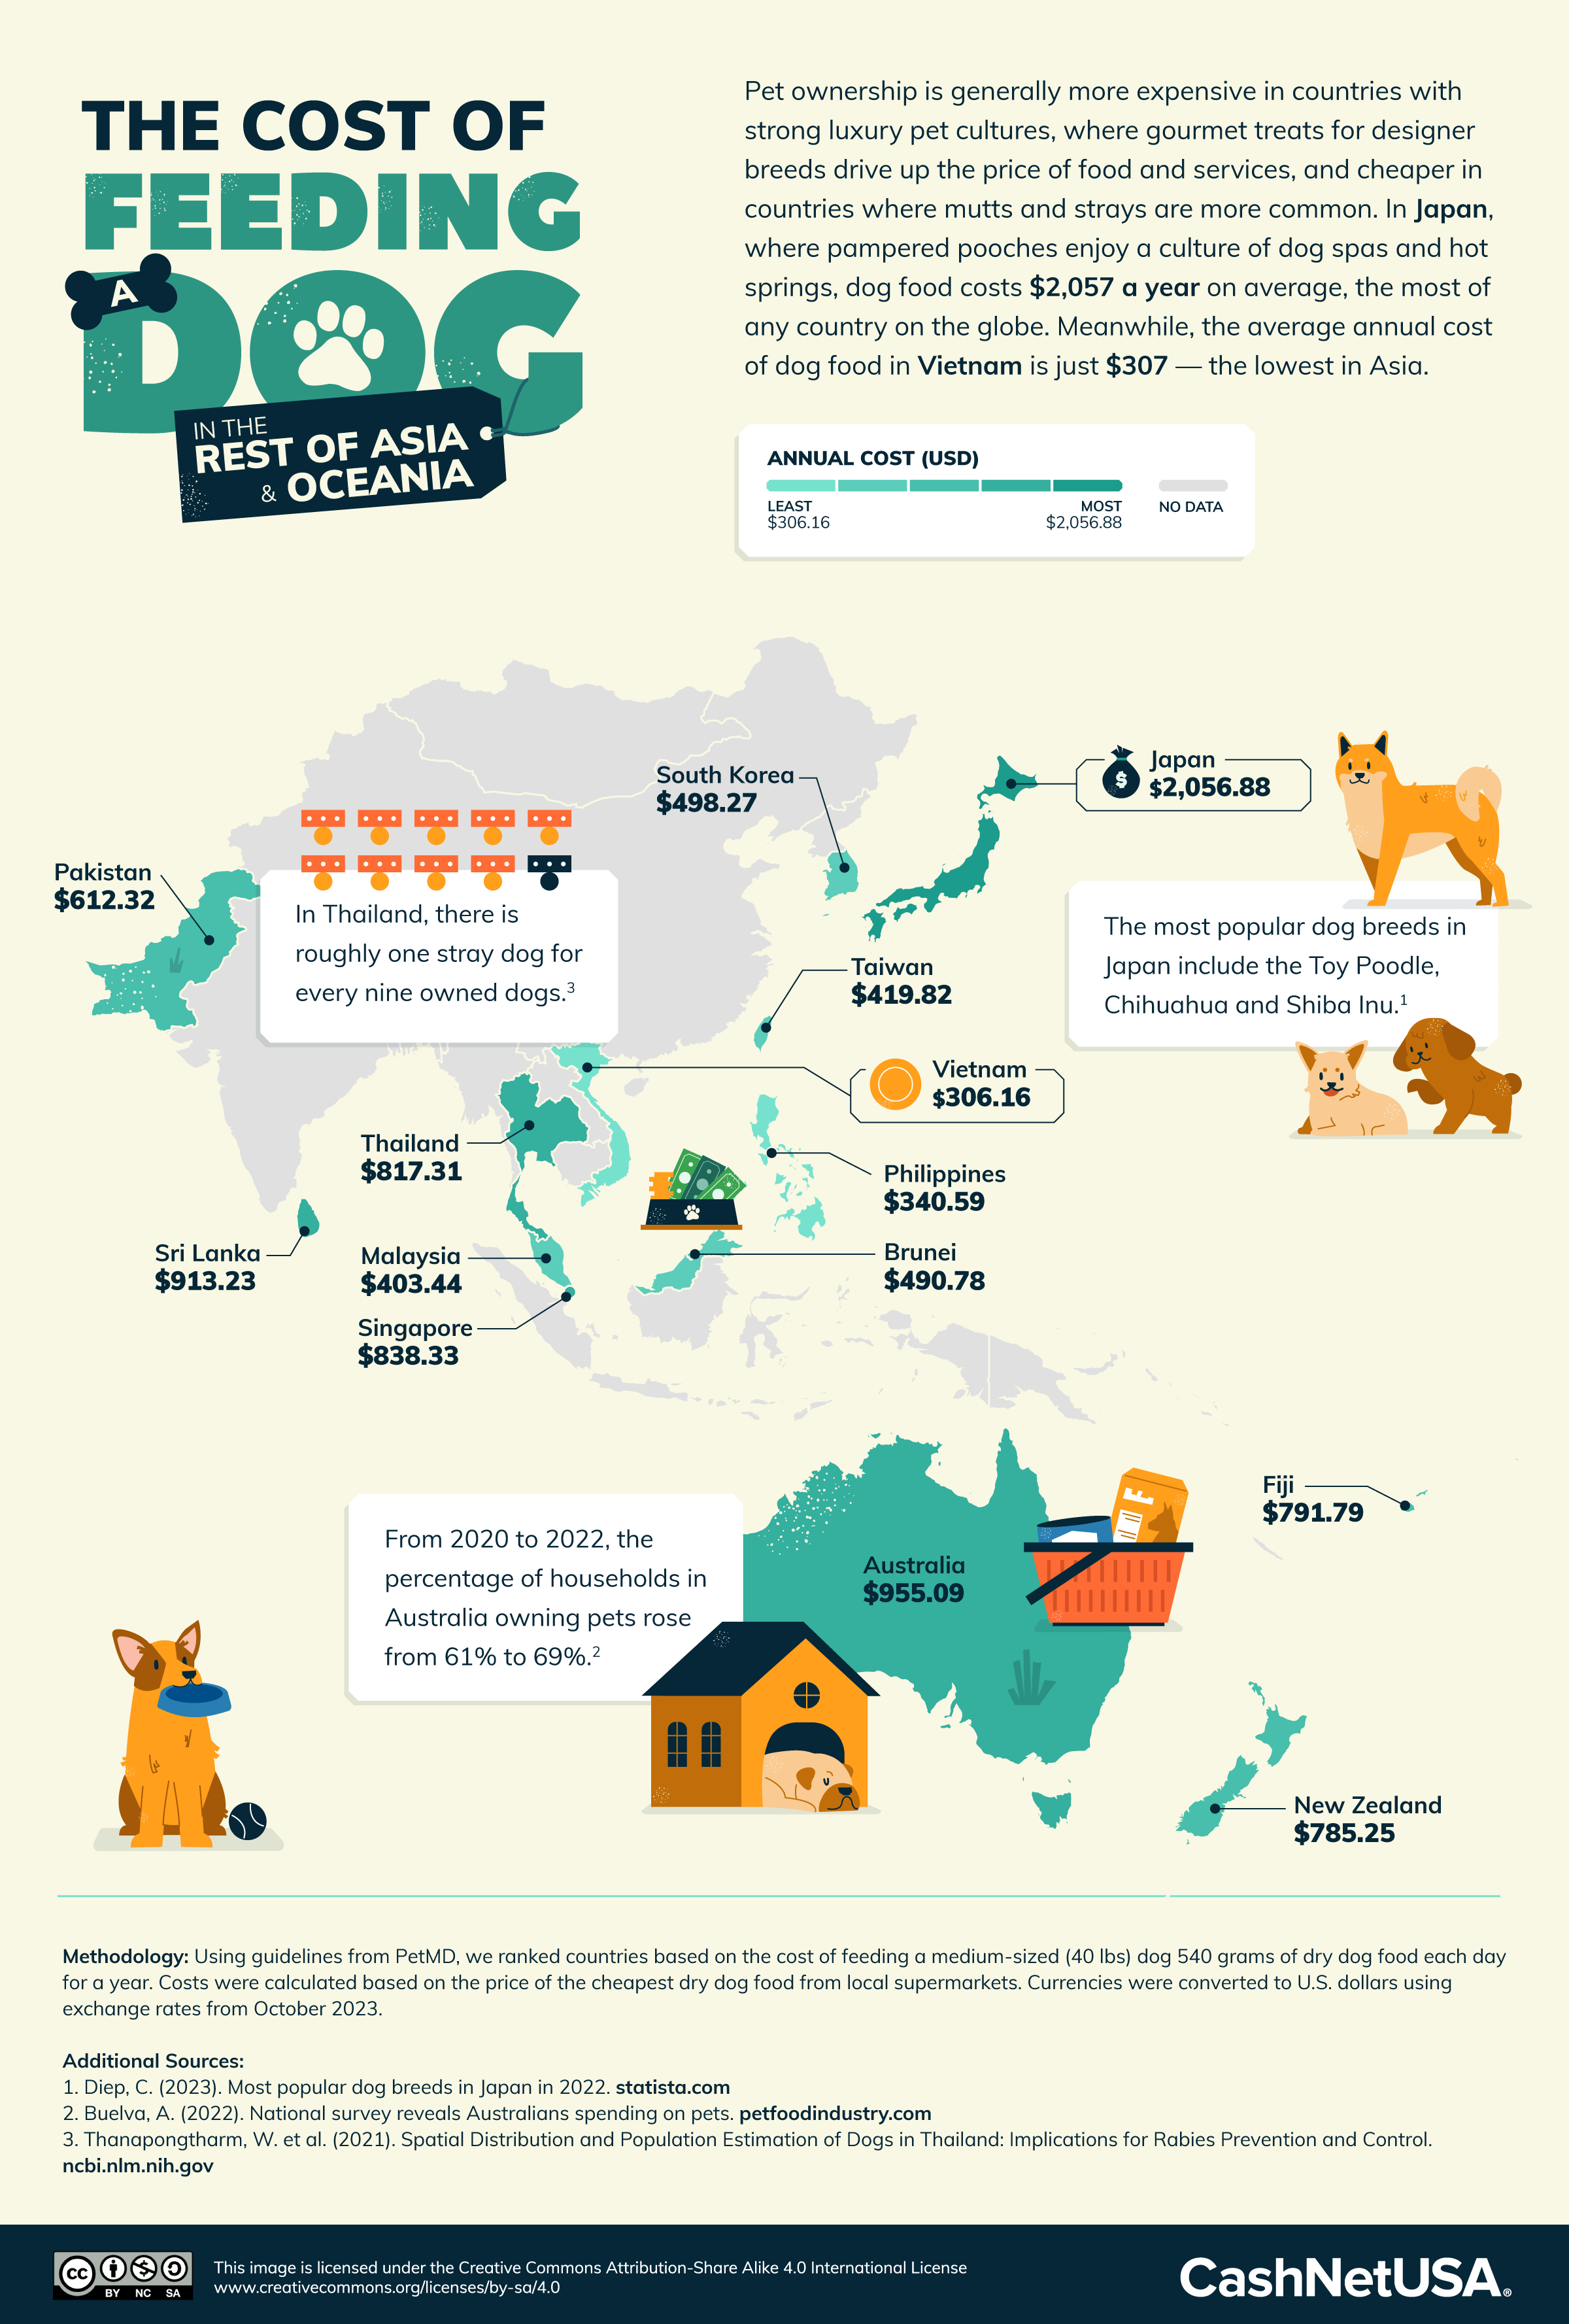 Infographic of the cost of feeding a dog in the the rest of Asia and Oceania.